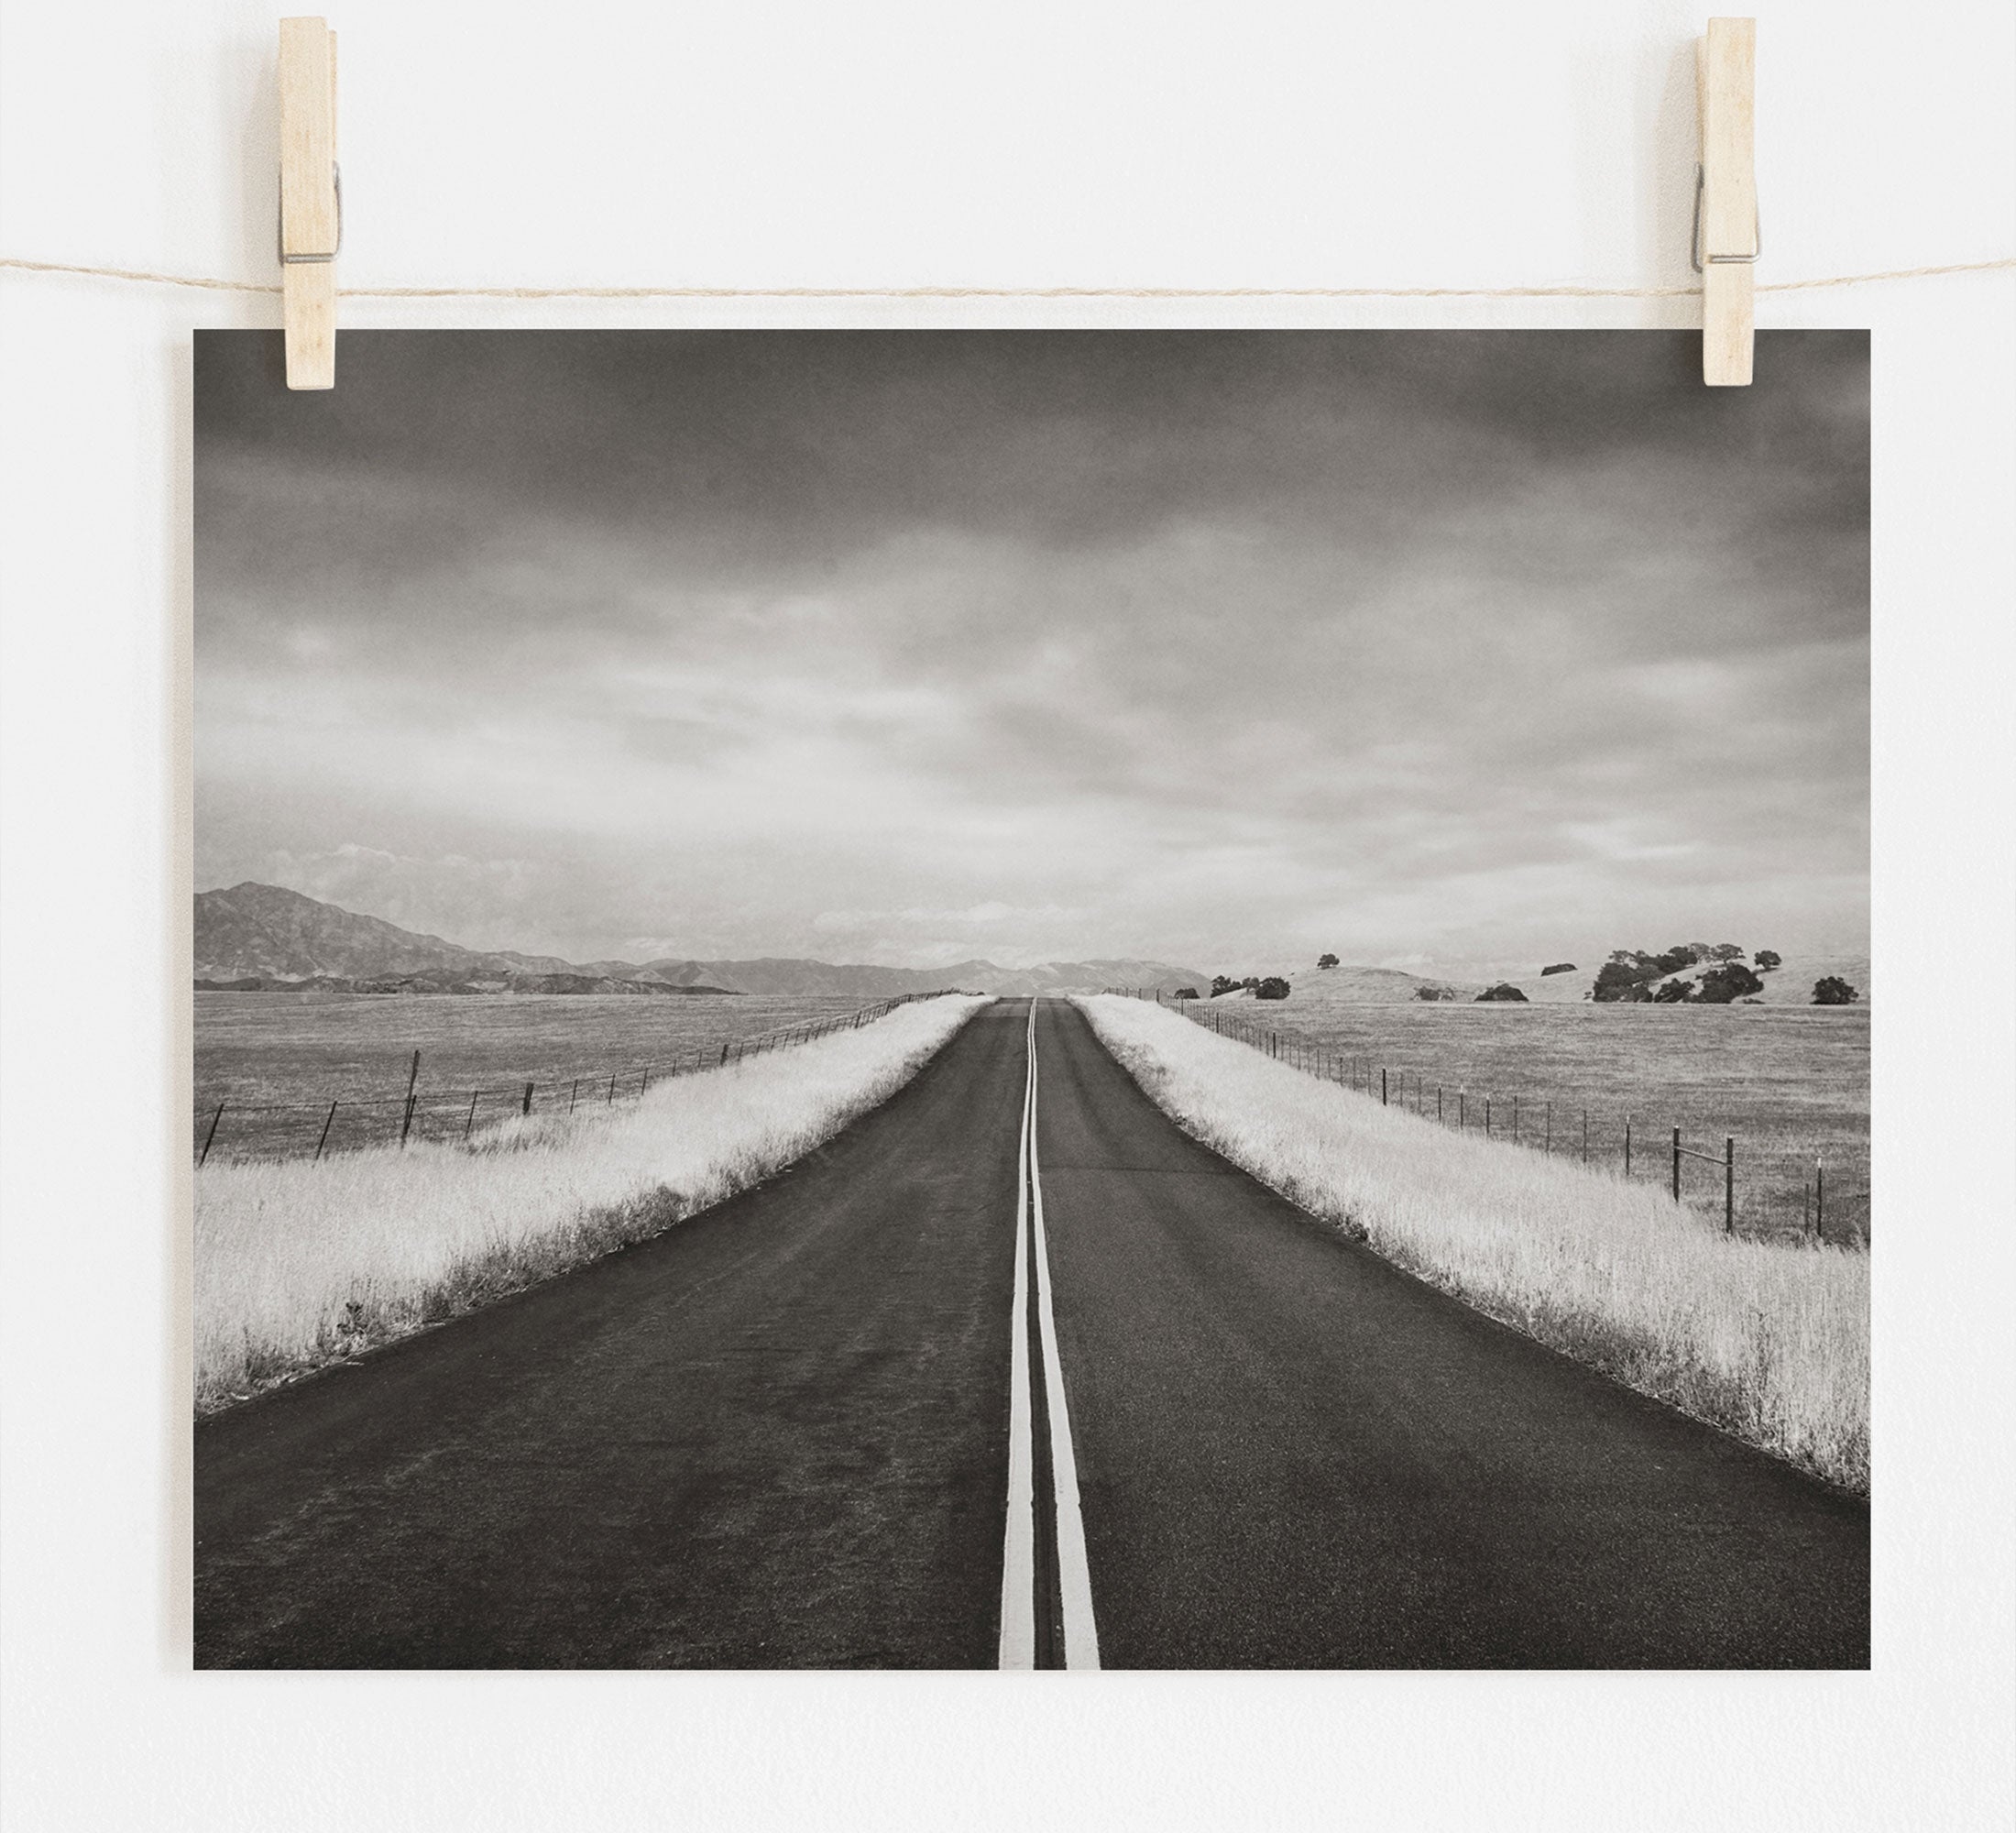 Offley Green's Black and White Rural Landscape Art, 'American Road Trip', printed on archival photographic paper, features an empty road extending into the distance under a cloudy sky, flanked by fields and mountains in sepia tones.